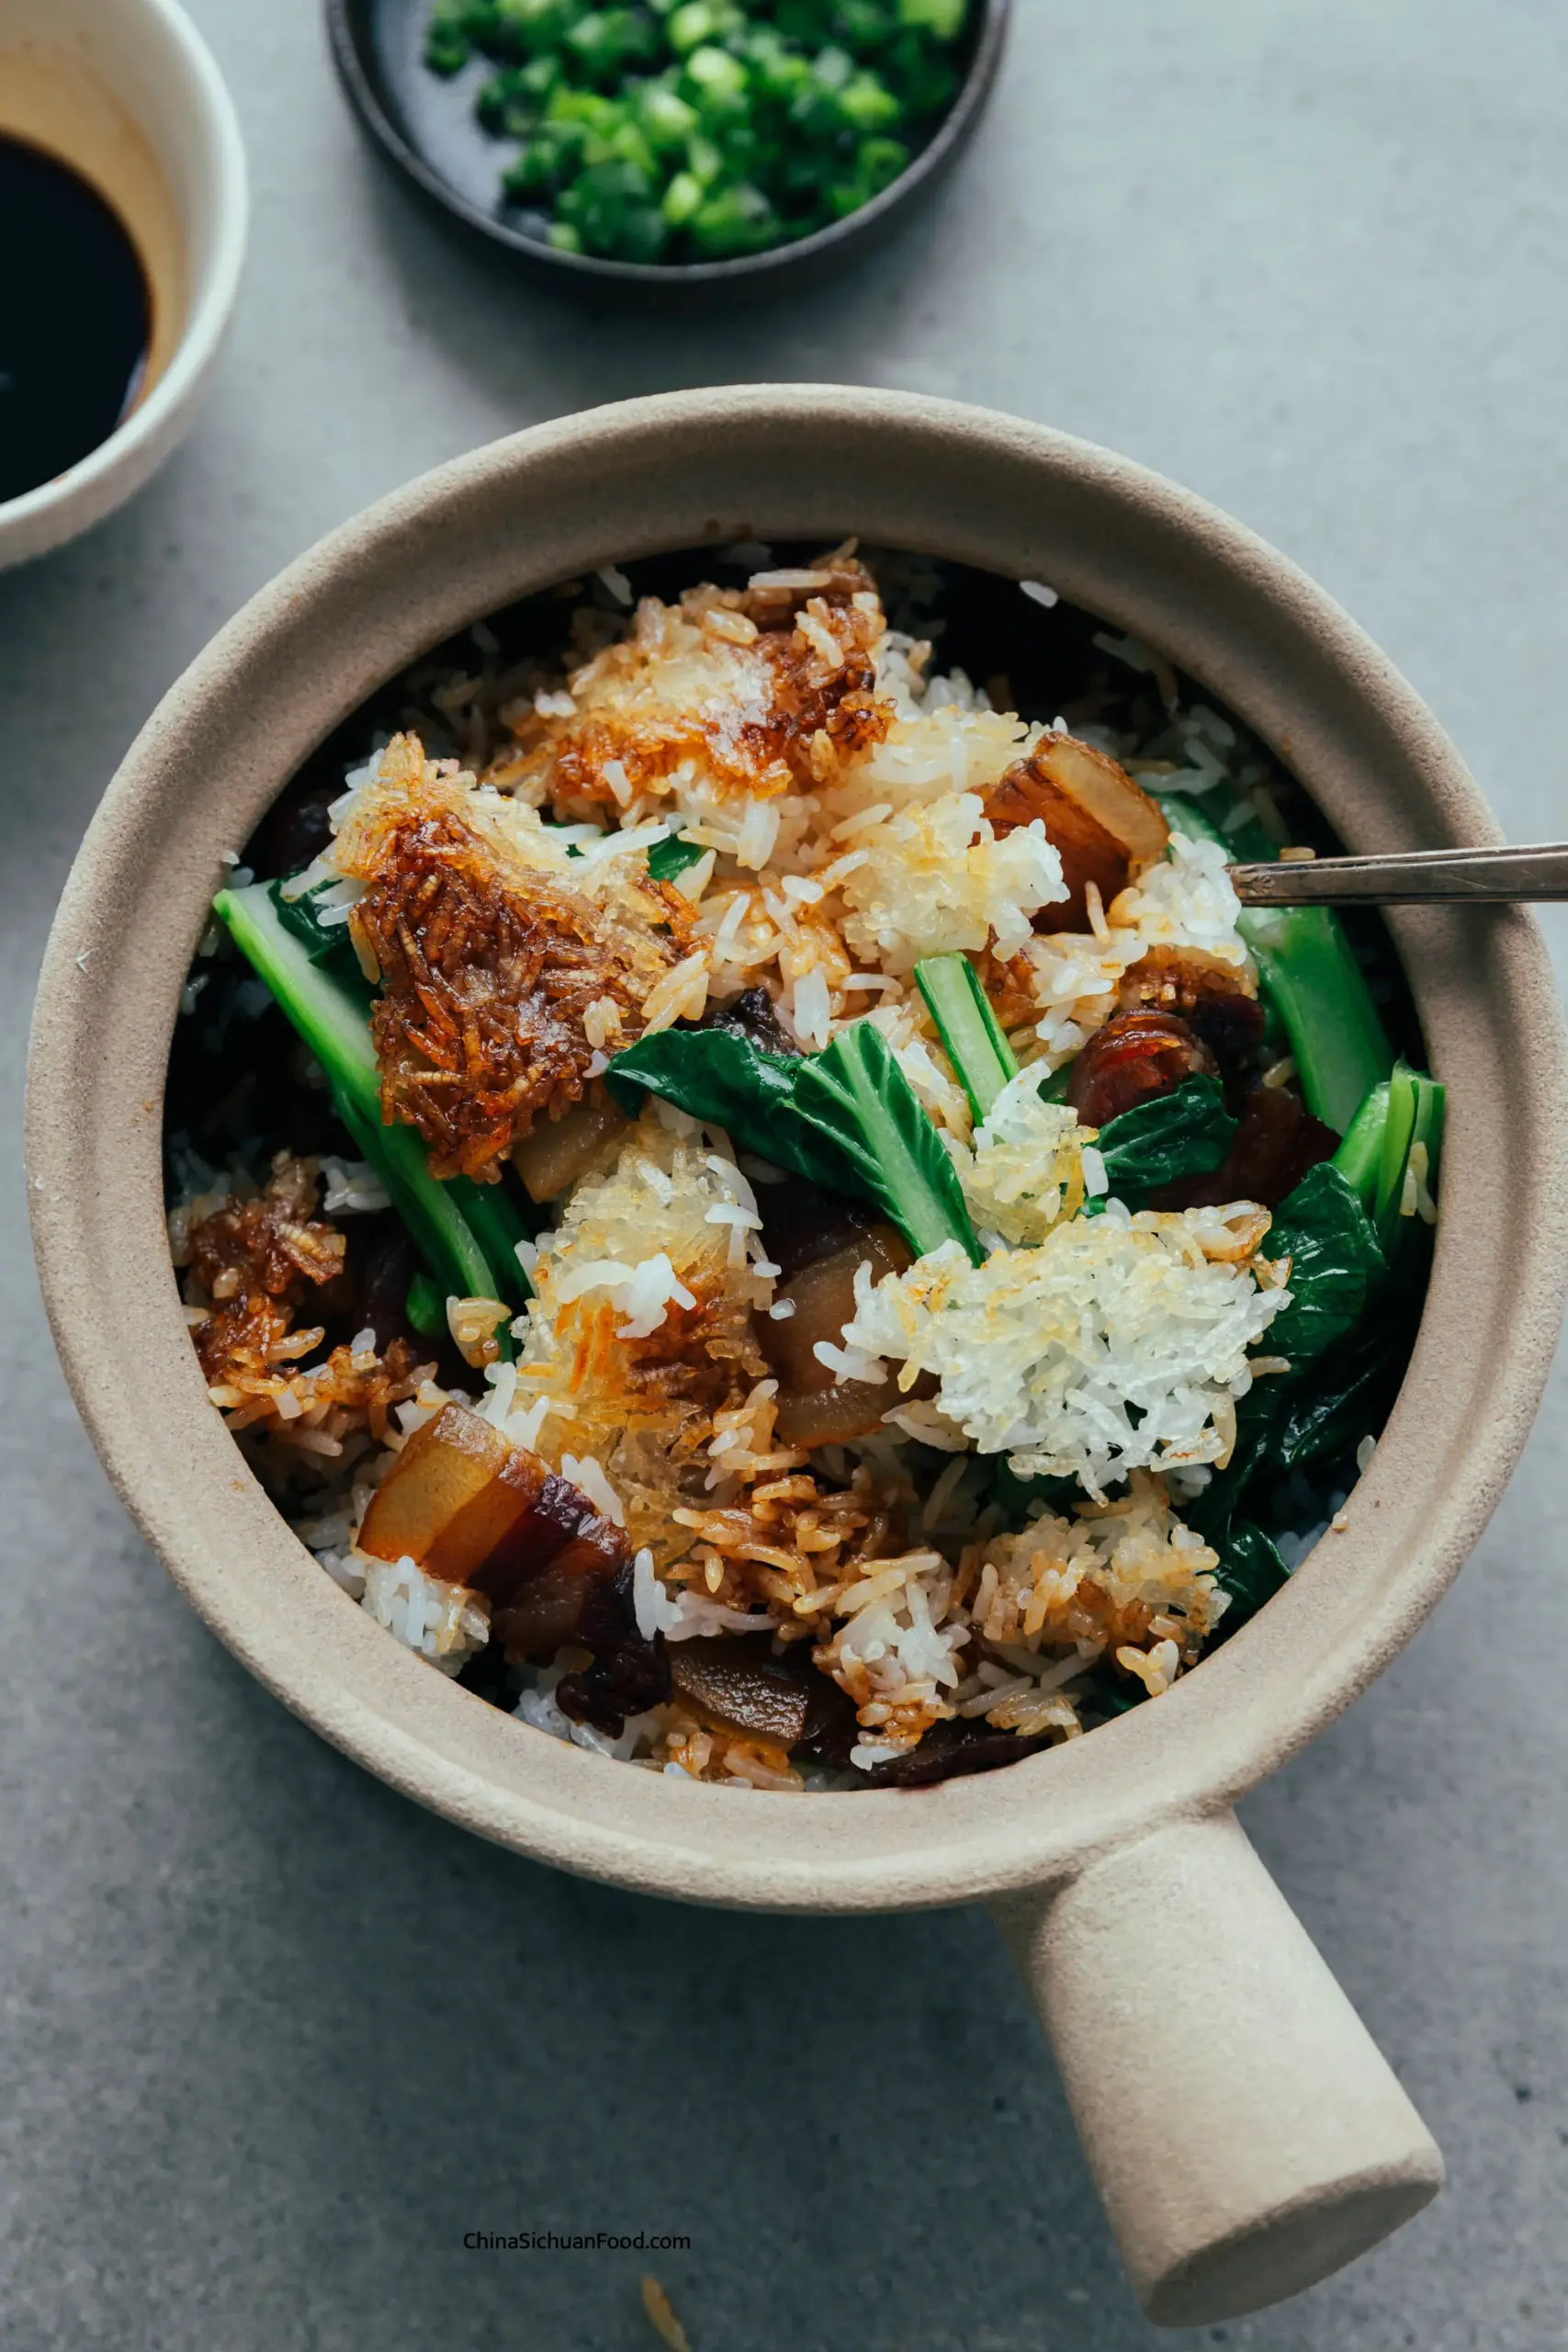 https://www.chinasichuanfood.com/wp-content/uploads/2016/12/claypot-rice-47-scaled.webp